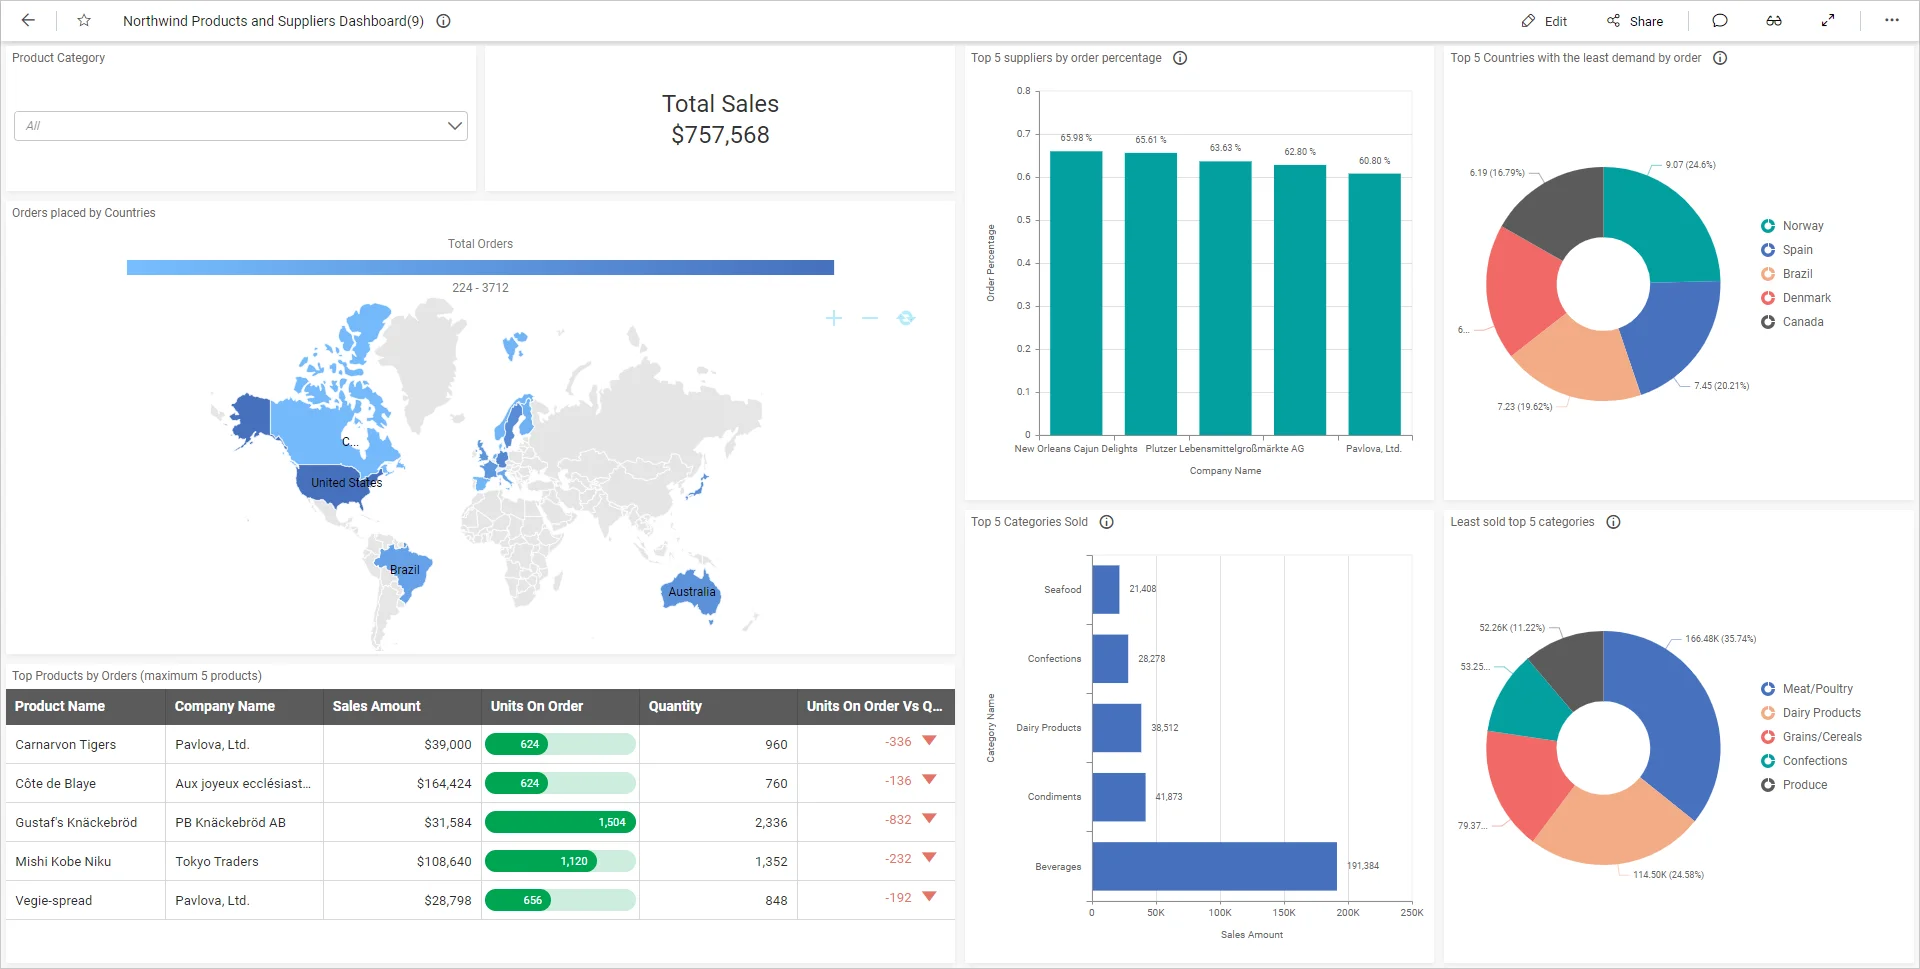 Northwind Products and Suppliers dashboard